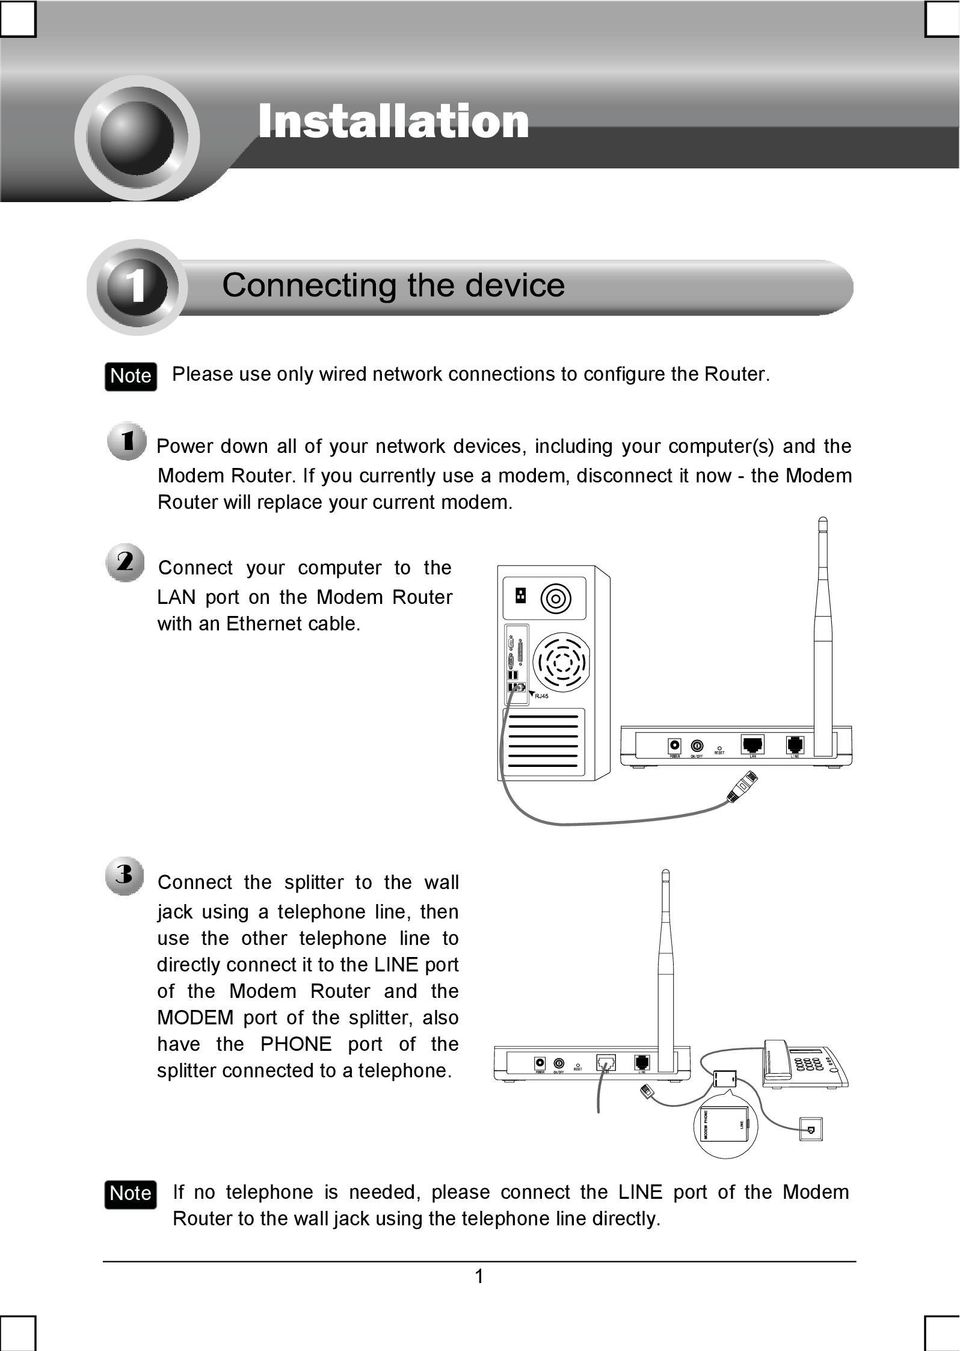 Connect the splitter to the wall jack using a telephone line, then use the other telephone line to directly connect it to the LINE port of the Modem Router and the MODEM port of the